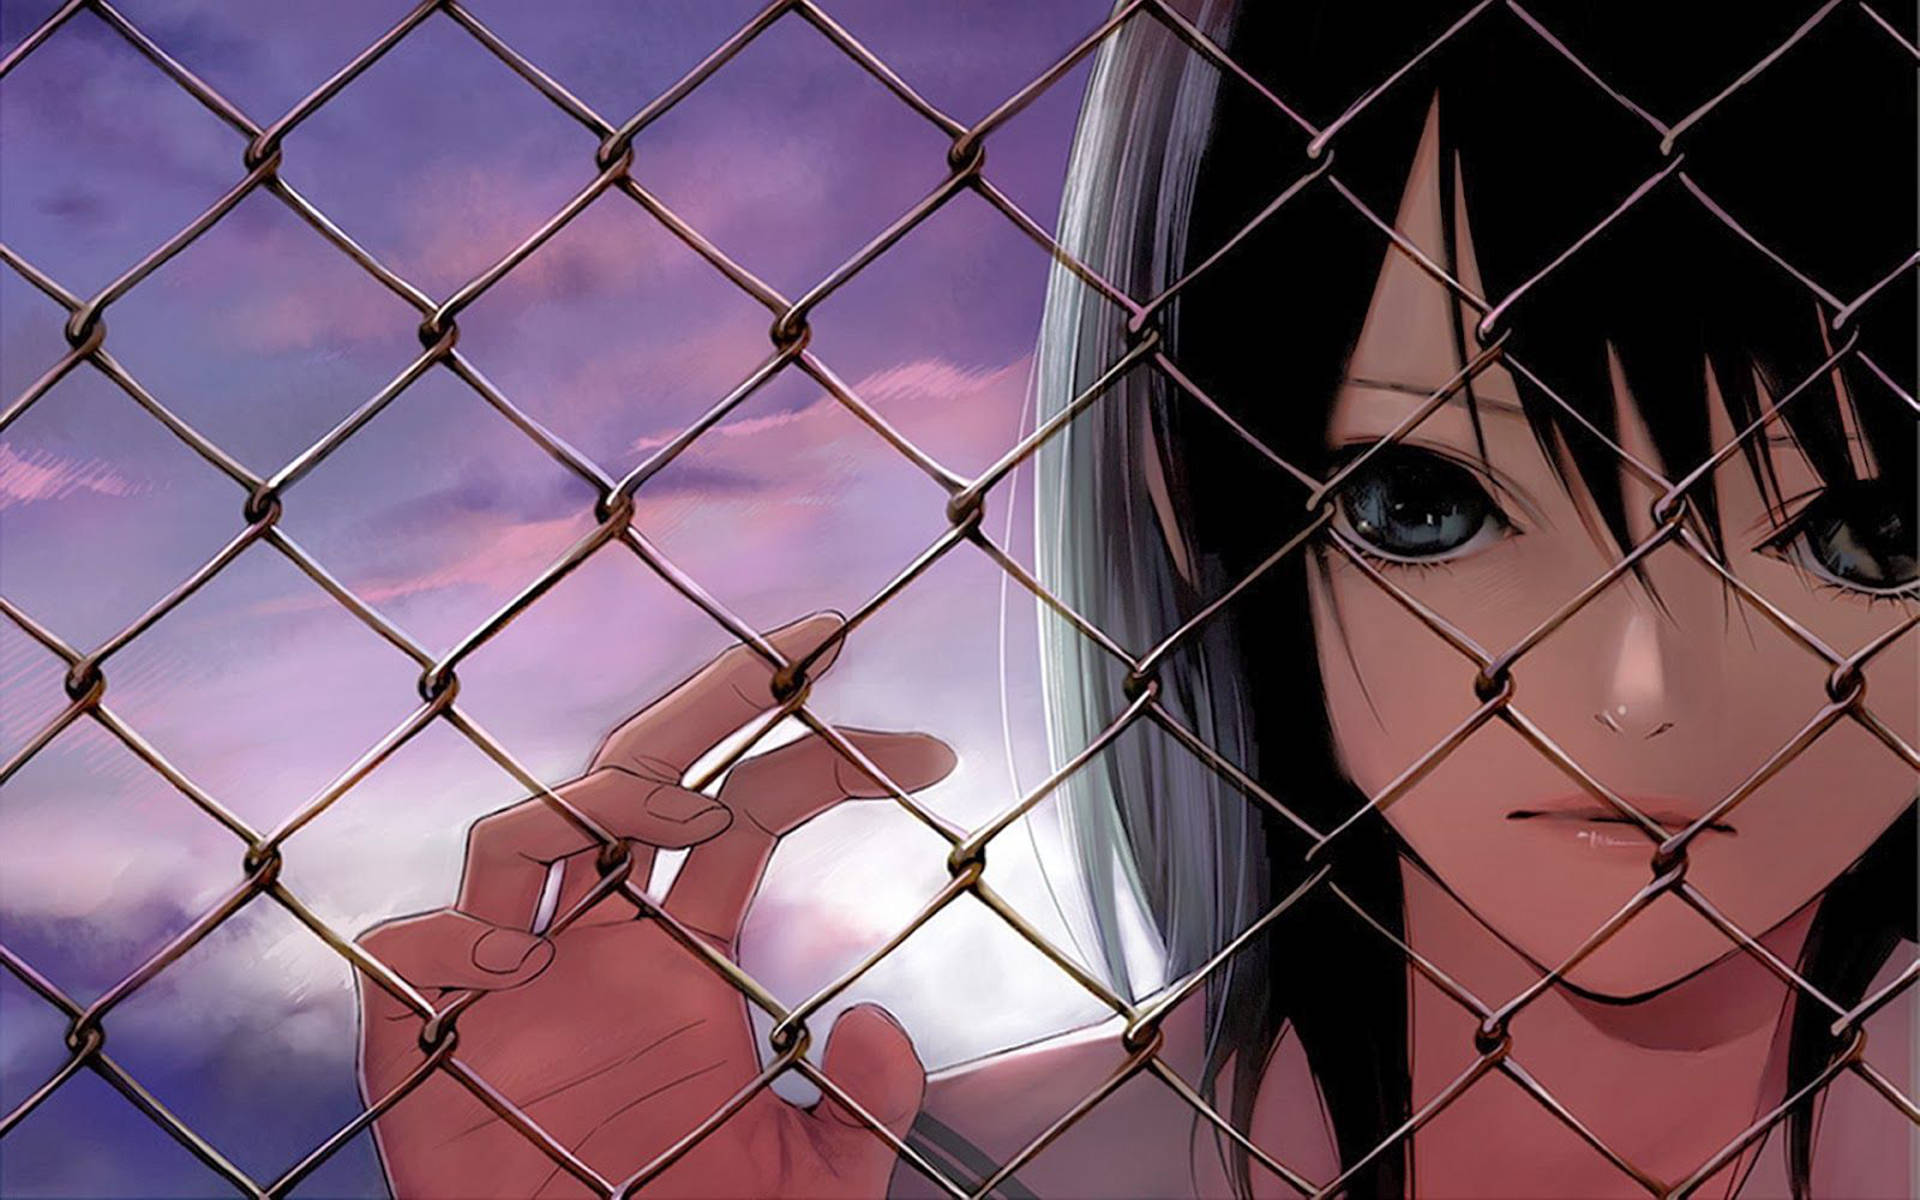 Staring Sad Girl In The Fence Background